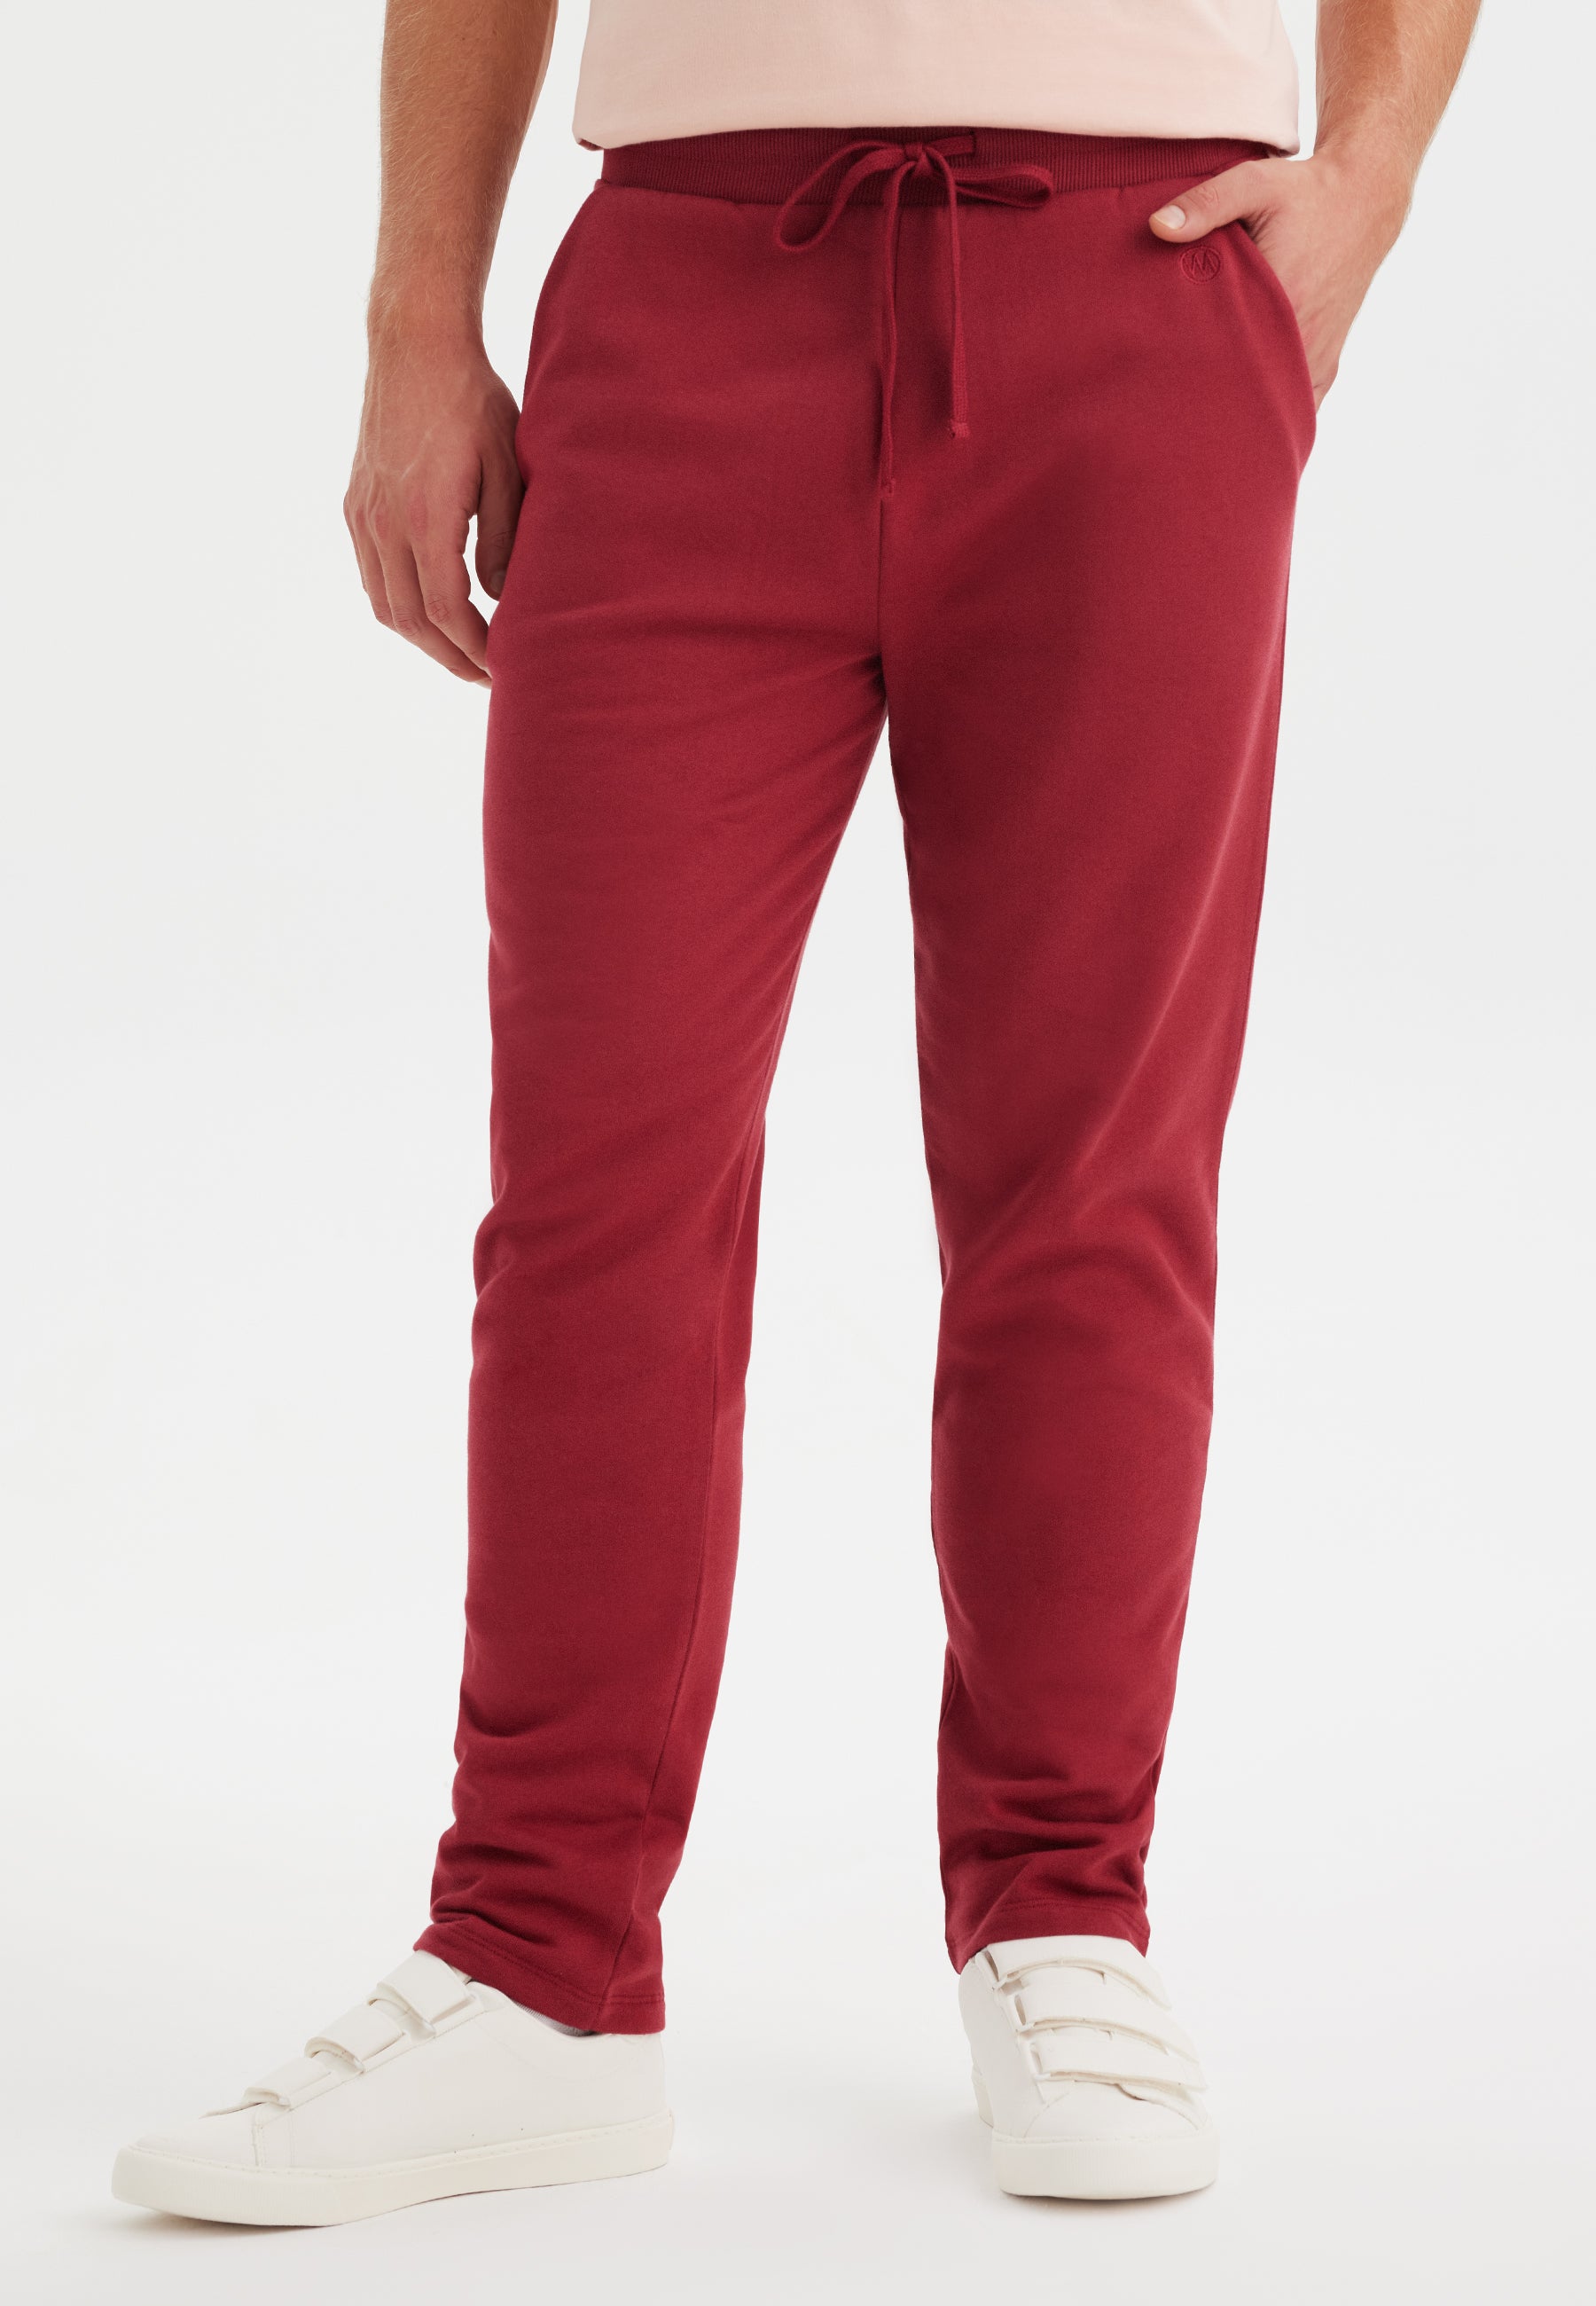 CORE SWEATPANTS in Mineral Red